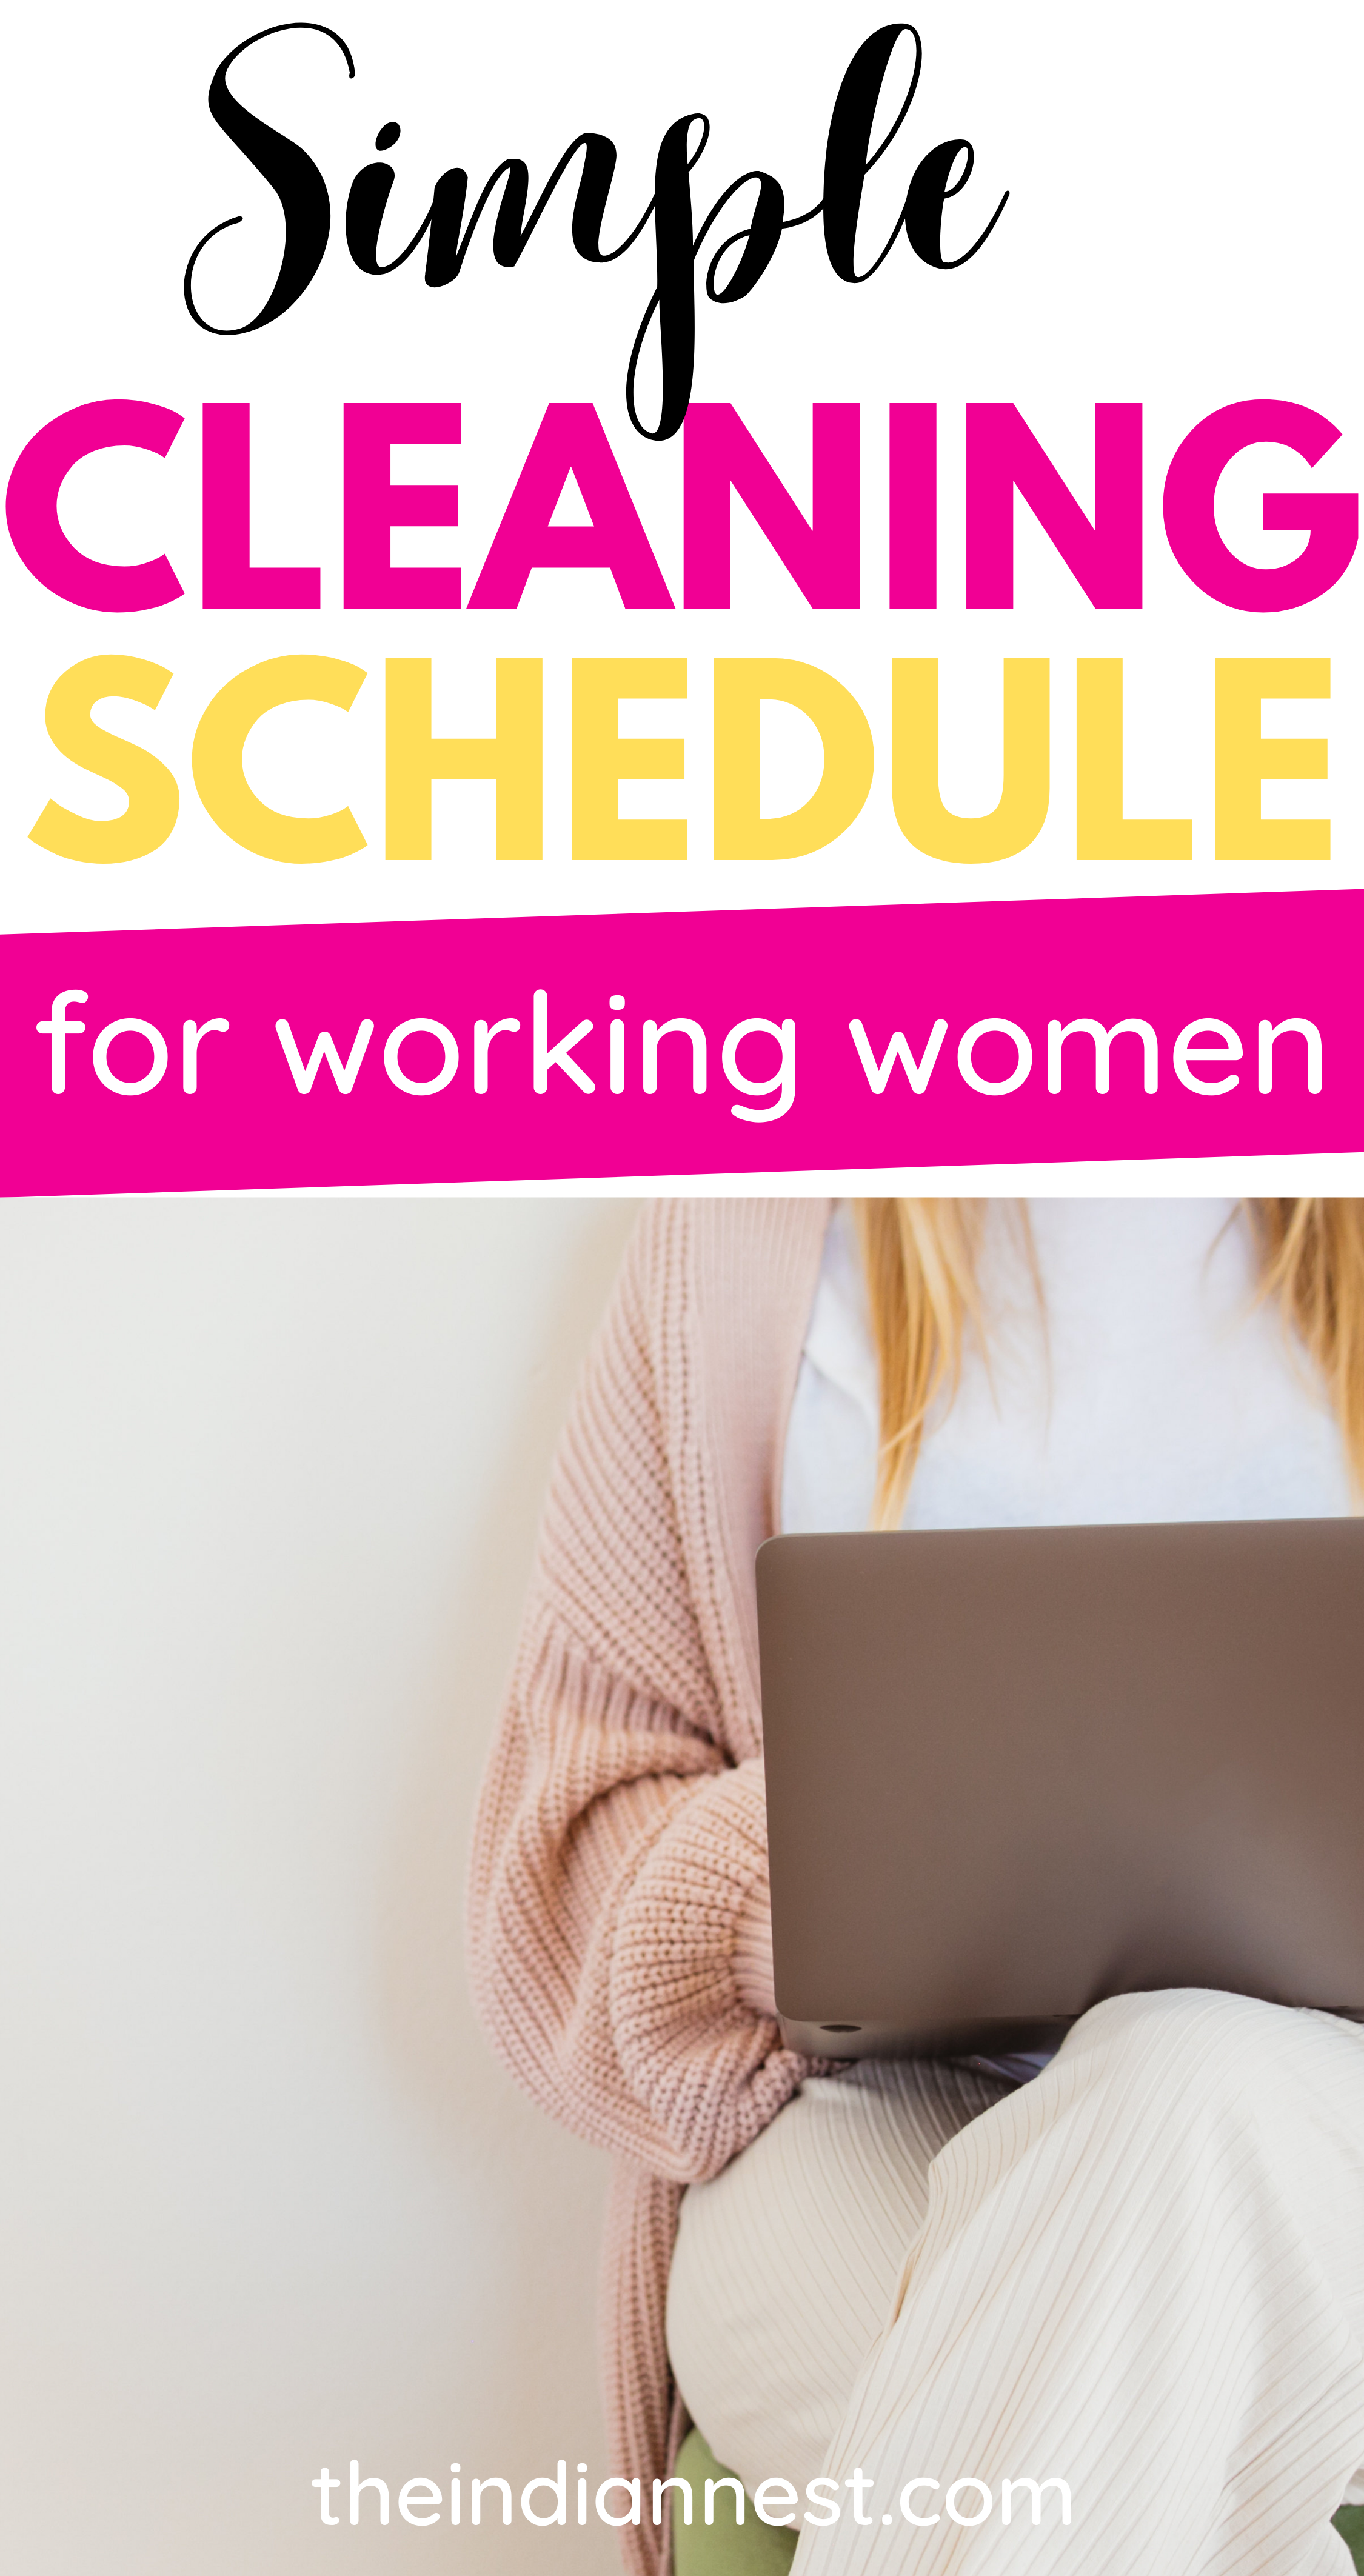 Simple to Follow Cleaning Schedule for Working Moms Use this simple to follow cleaning schedule for working moms with a free printable schedule to keep you on track. Includes morning and evening daily task, weekly tasks and monthly tasks. You home will always be clean and tidy if you follow this easy schedule.